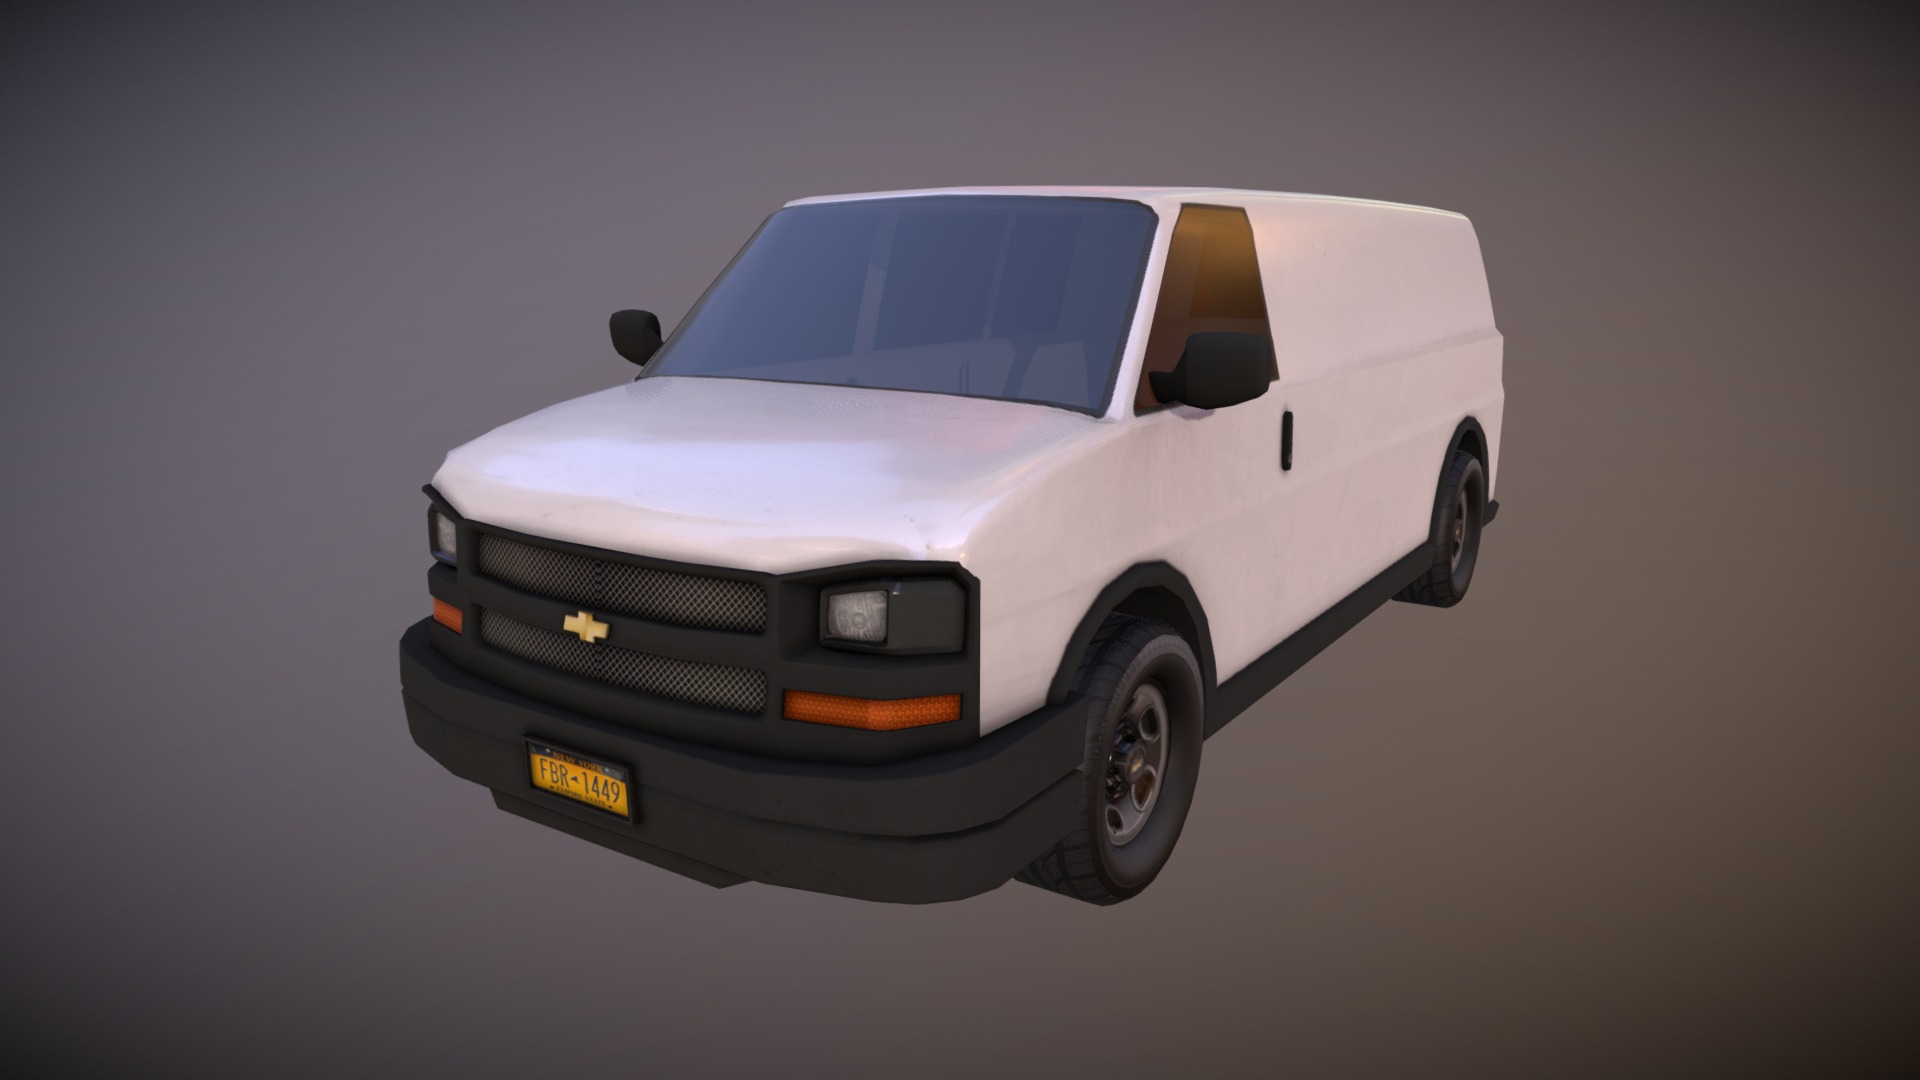 3D model 2013 Chevrolet Express - This is a 3D model of the 2013 Chevrolet Express. The 3D model is about a white car with a yellow license plate.